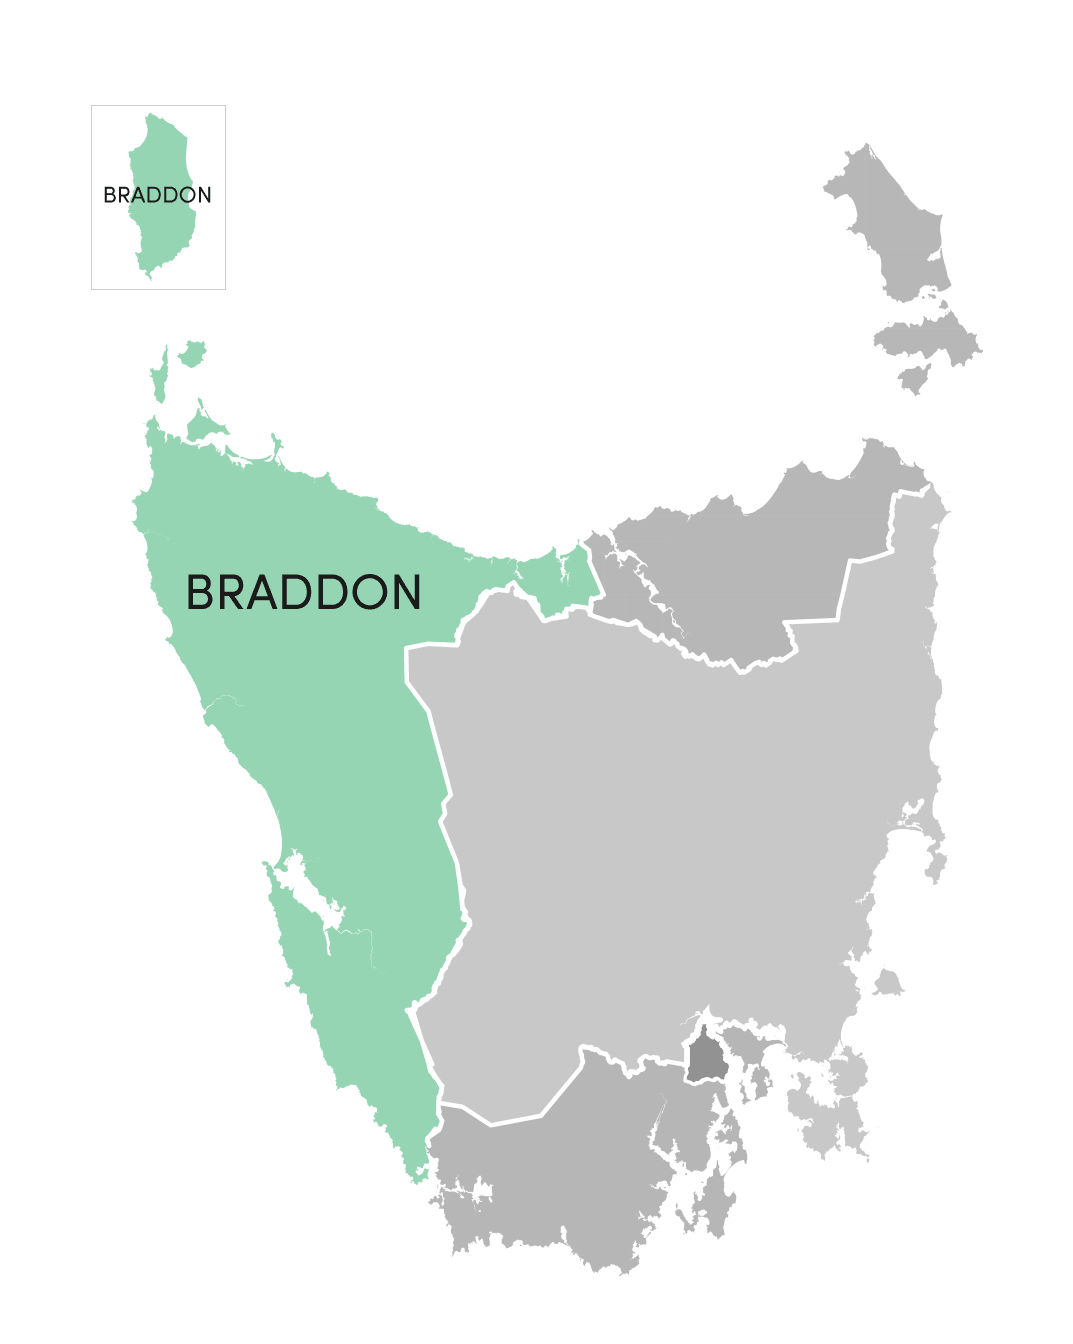 Braddon division highlighted on illustrated map of Tasmania